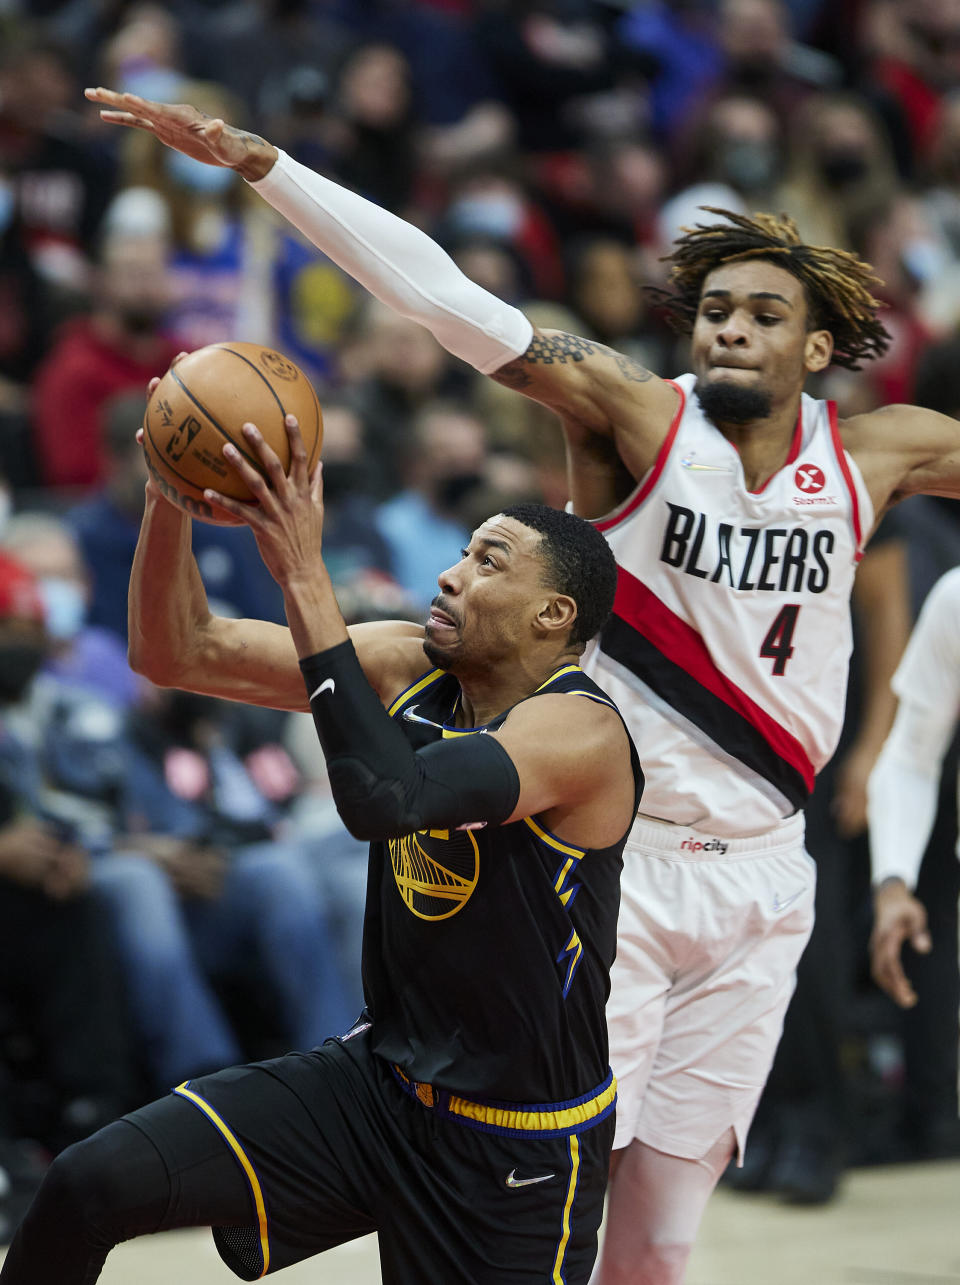 Golden State Warriors forward Otto Porter Jr., left, shoots in front of Portland Trail Blazers forward Greg Brown III during the first half of an NBA basketball game in Portland, Ore., Thursday, Feb. 24, 2022. (AP Photo/Craig Mitchelldyer)